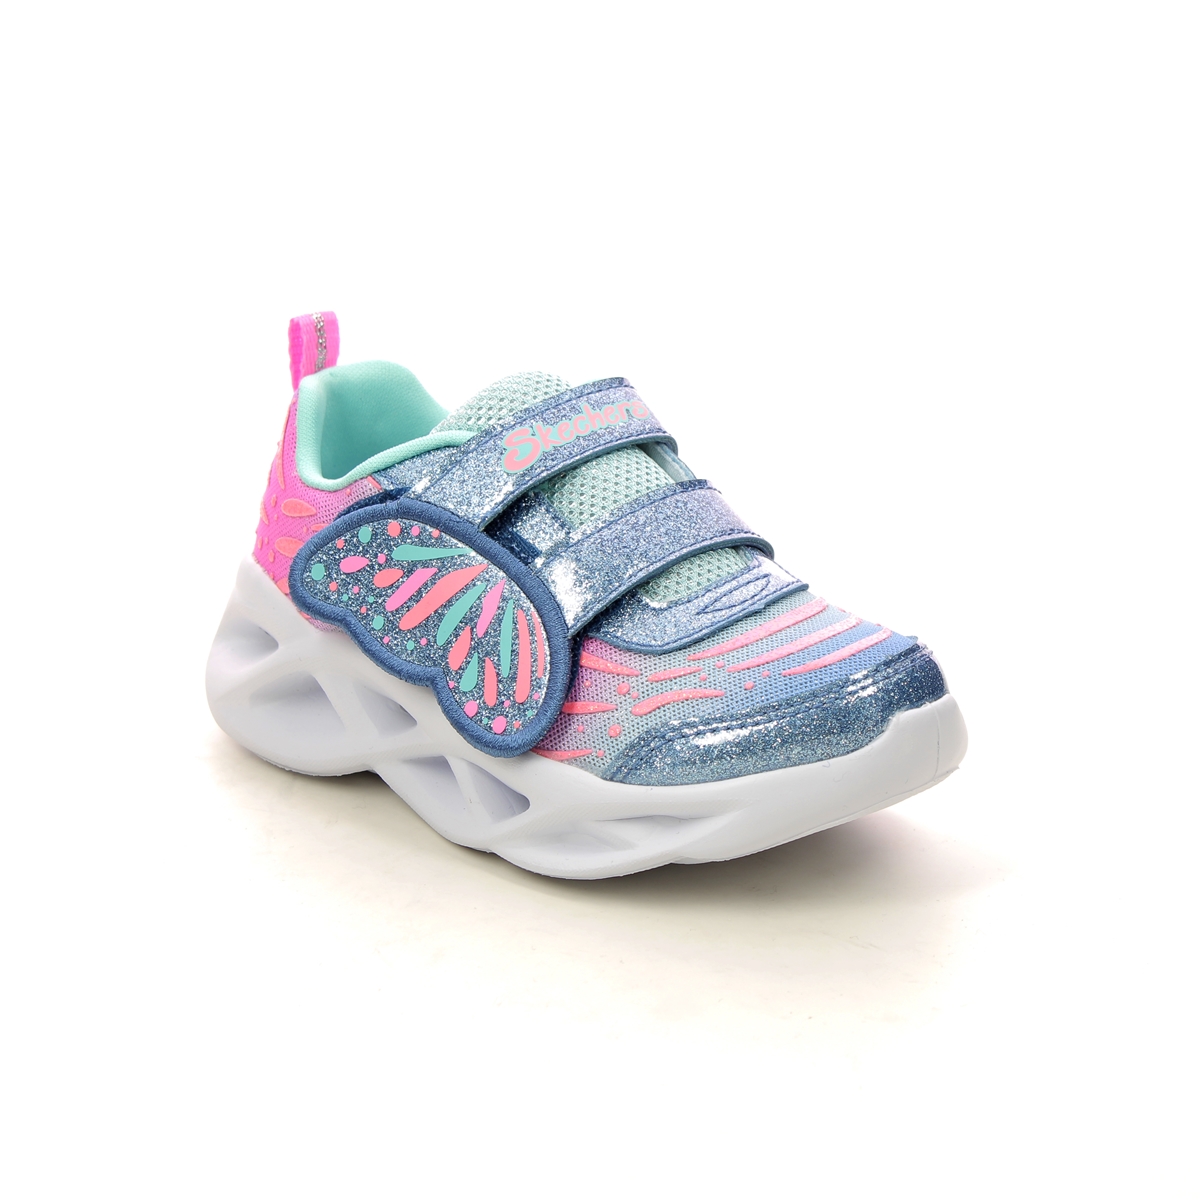 Skechers Twisty Brights BLTQ Blue Turquoise Kids girls trainers 302754N